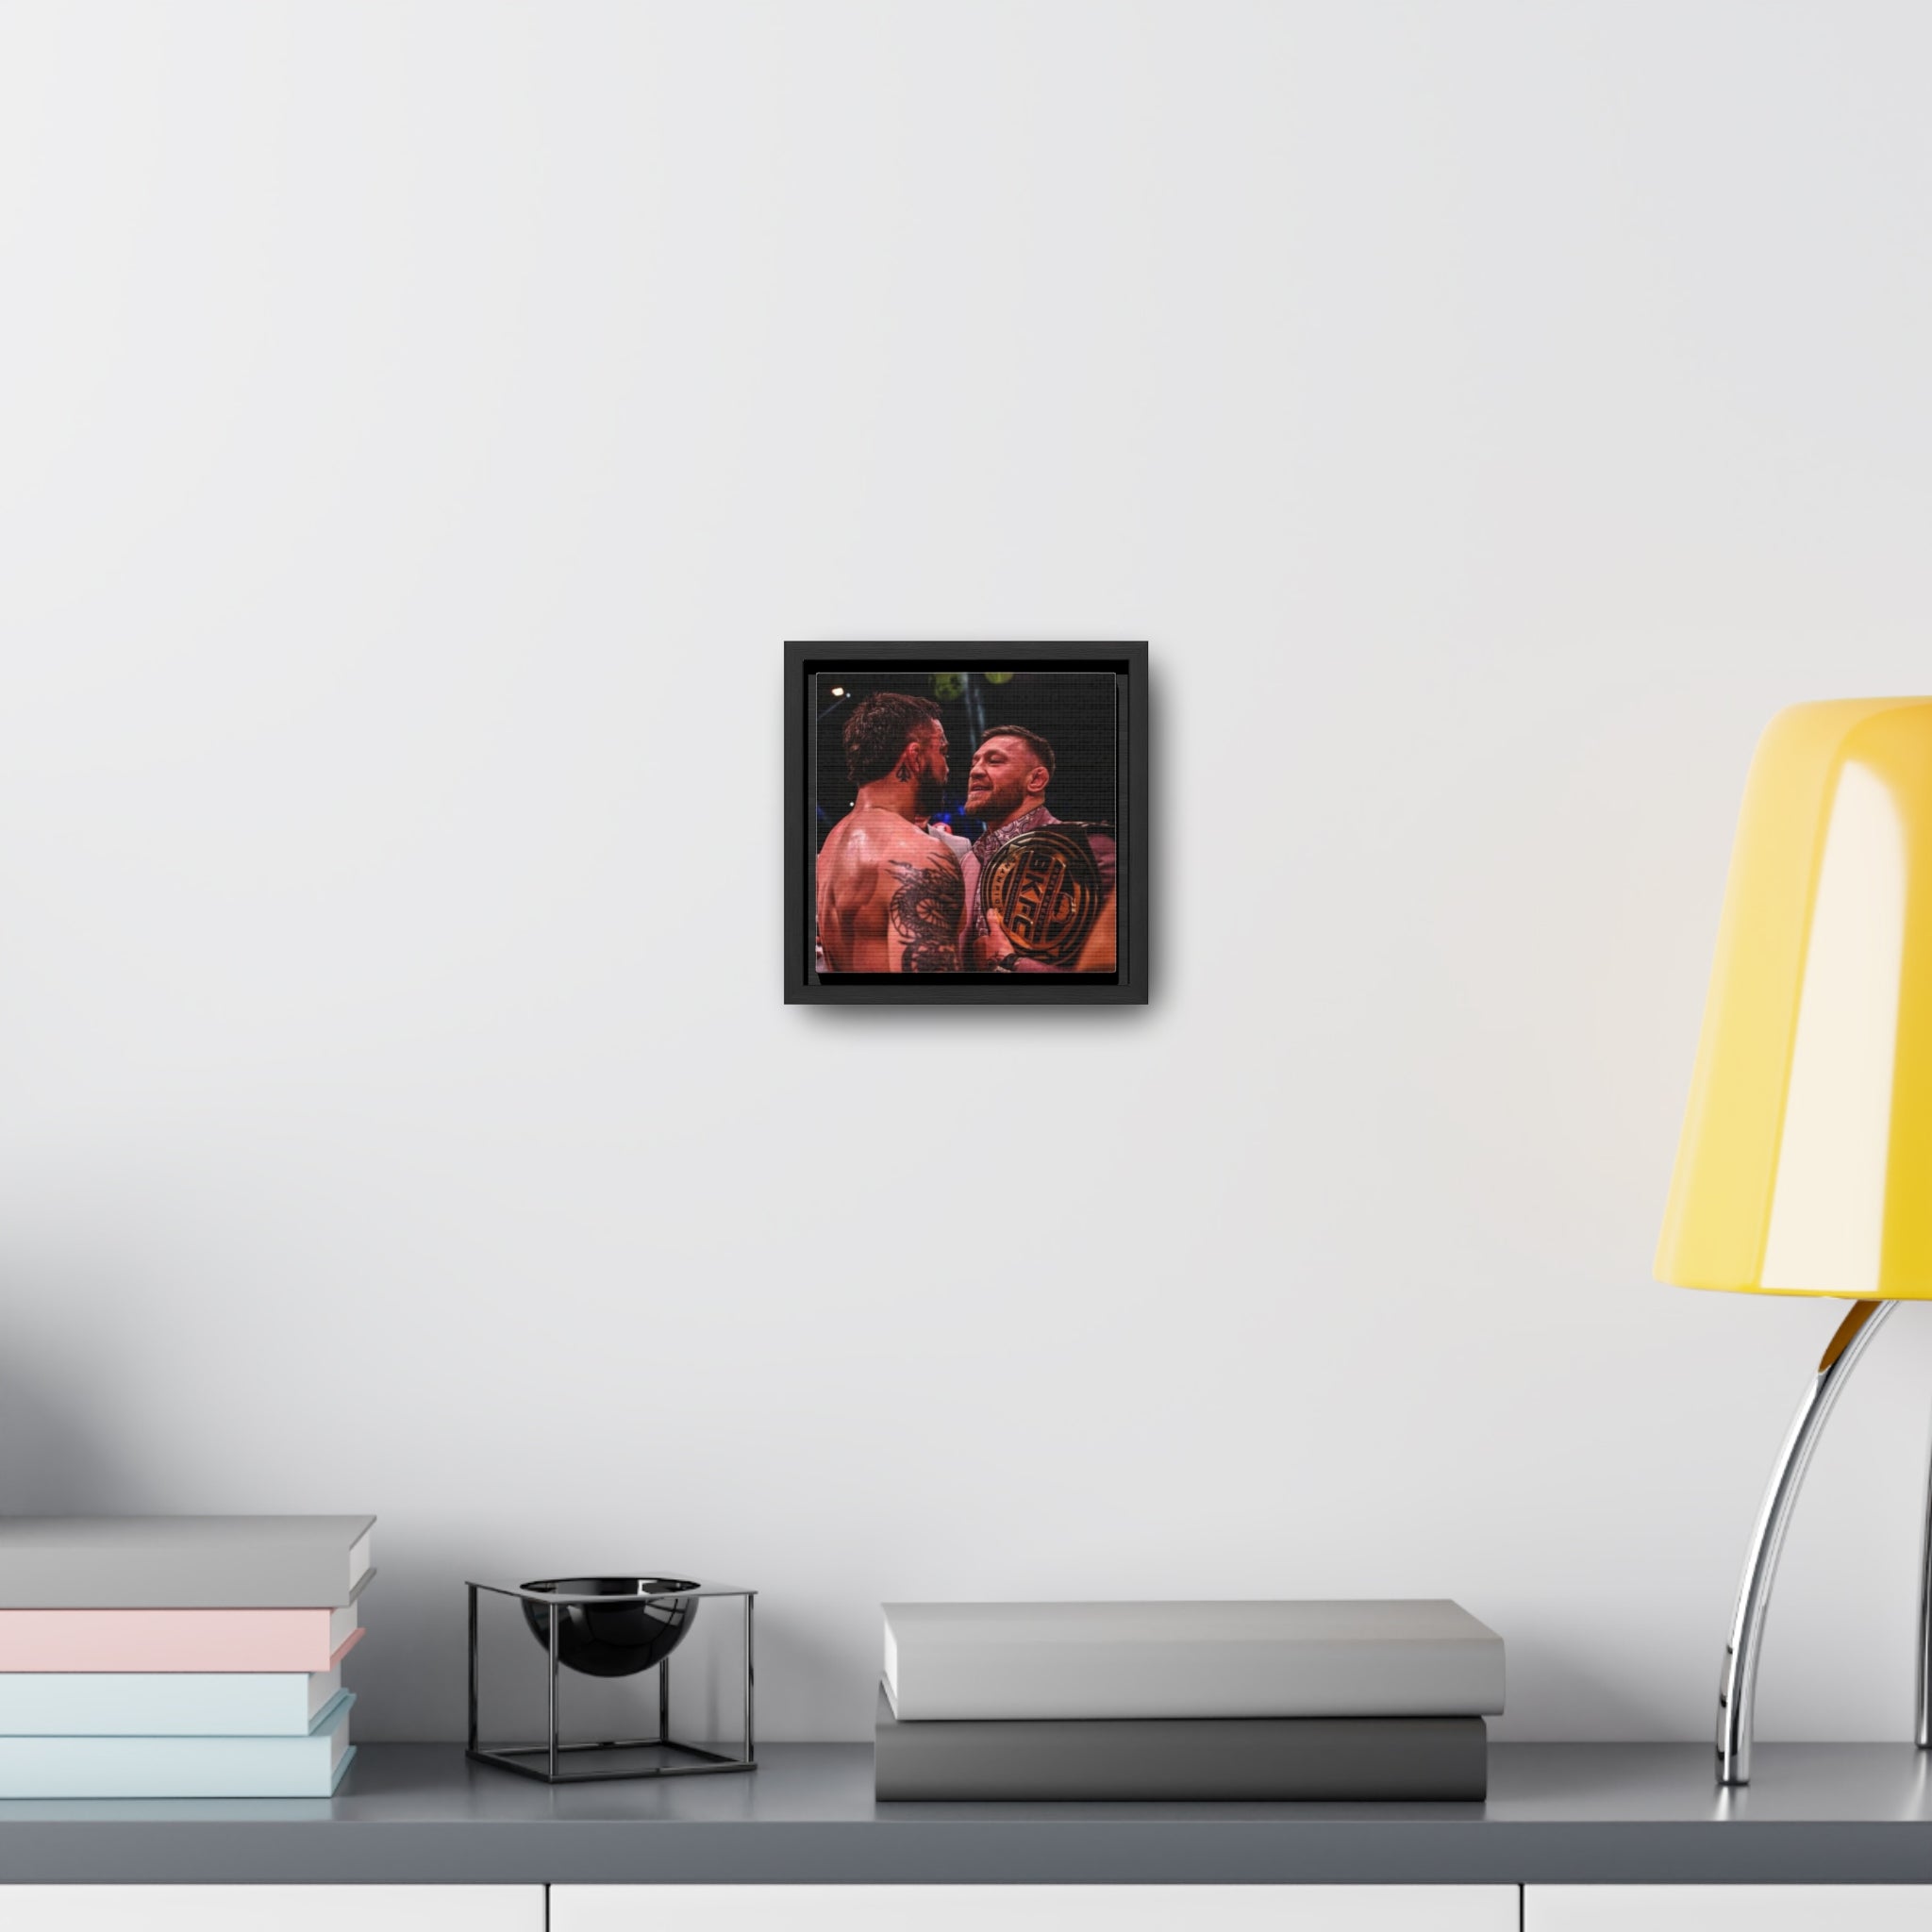 Gallery Canvas Wraps, Square Frame Mike Perry conor McGregor